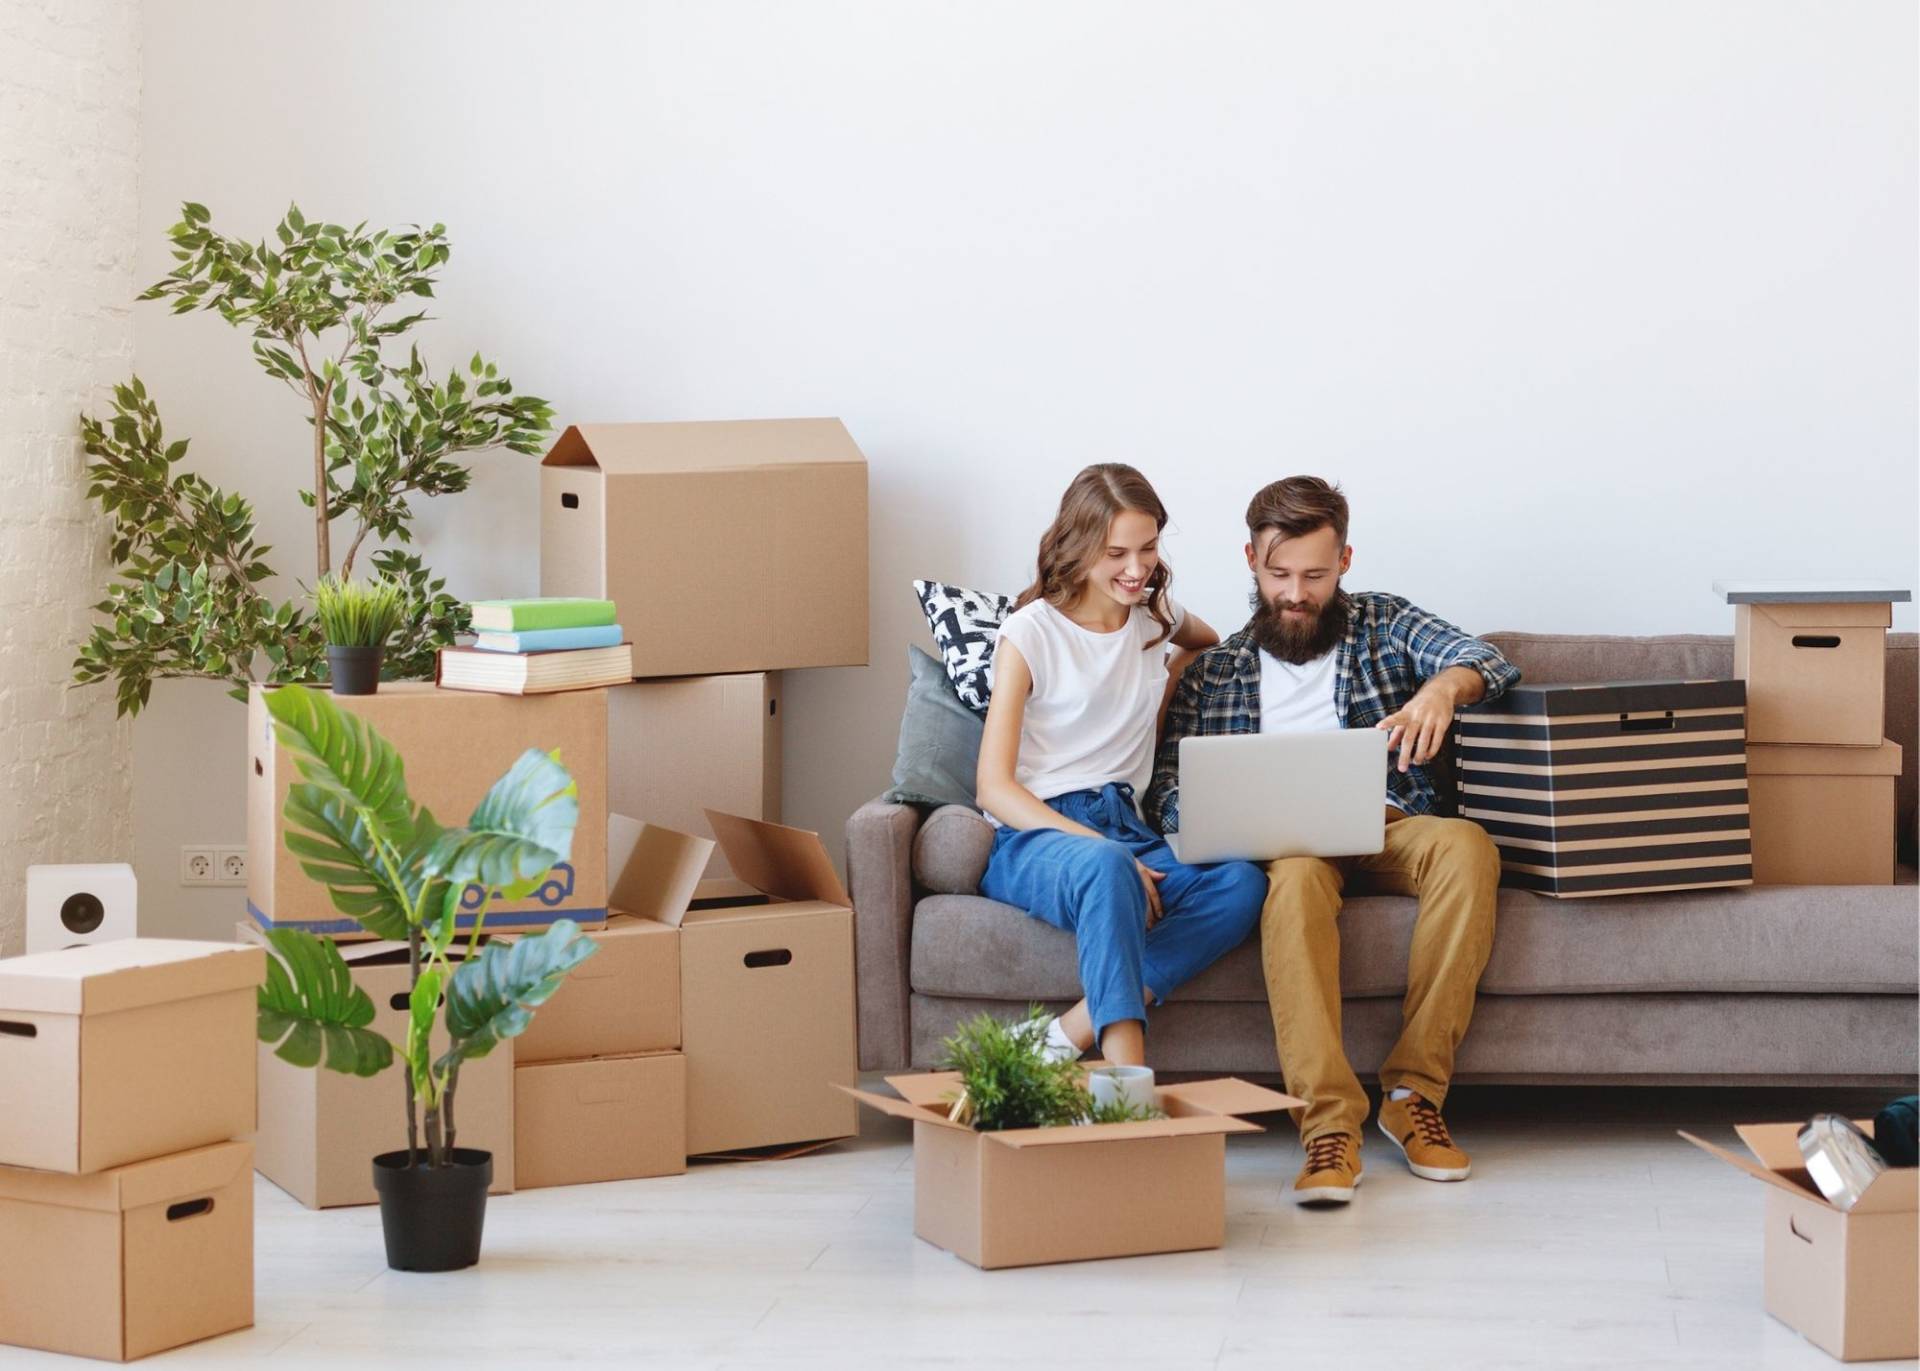 Couple planning their move among boxes